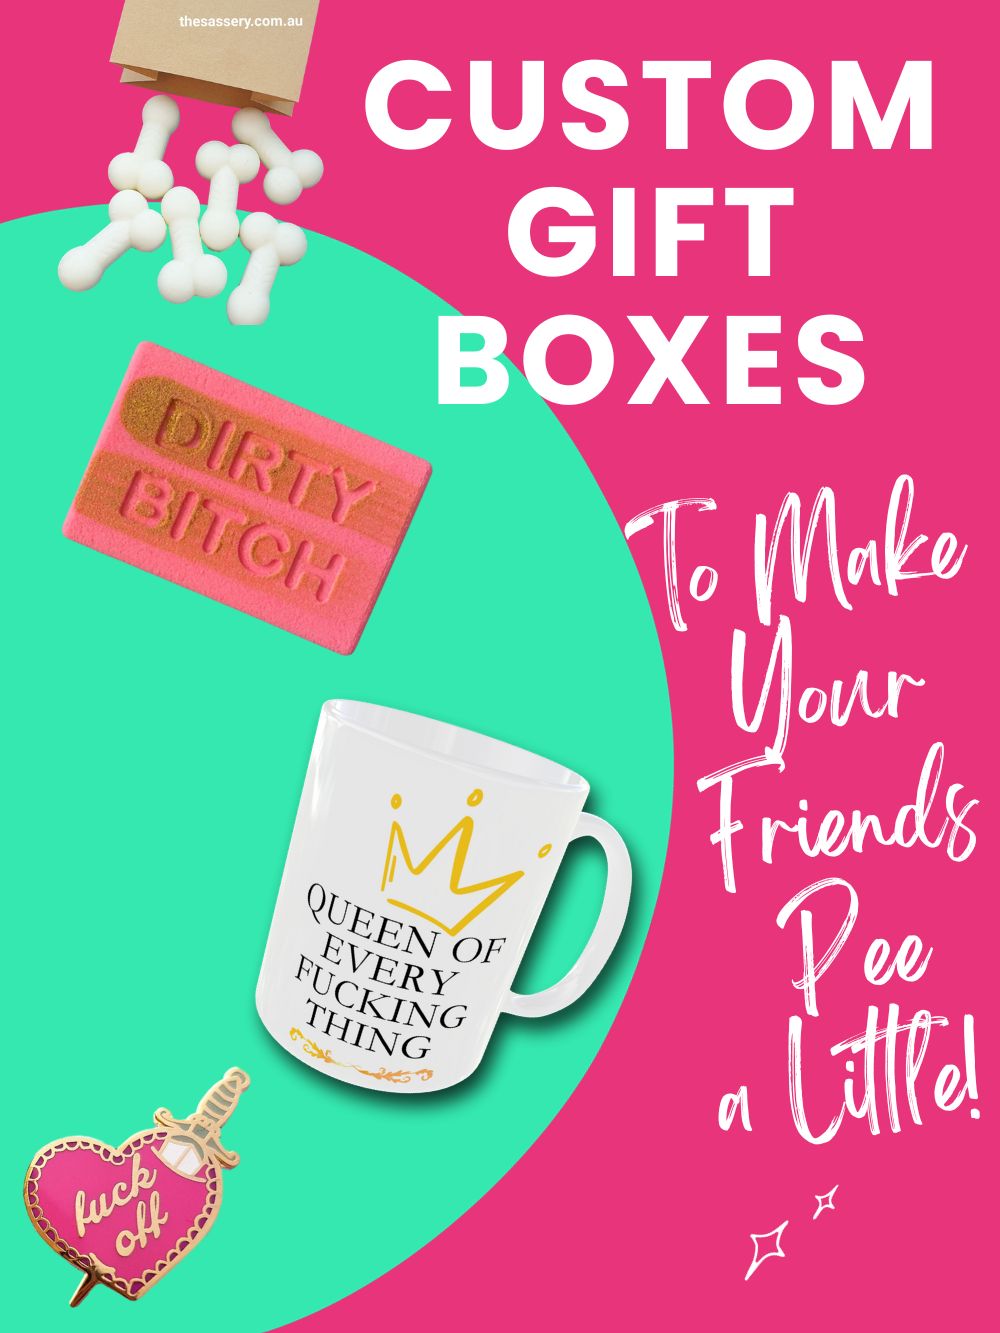 birthday gifts delivered, birthday boxes melbourne delivery all create your own gift box ideas